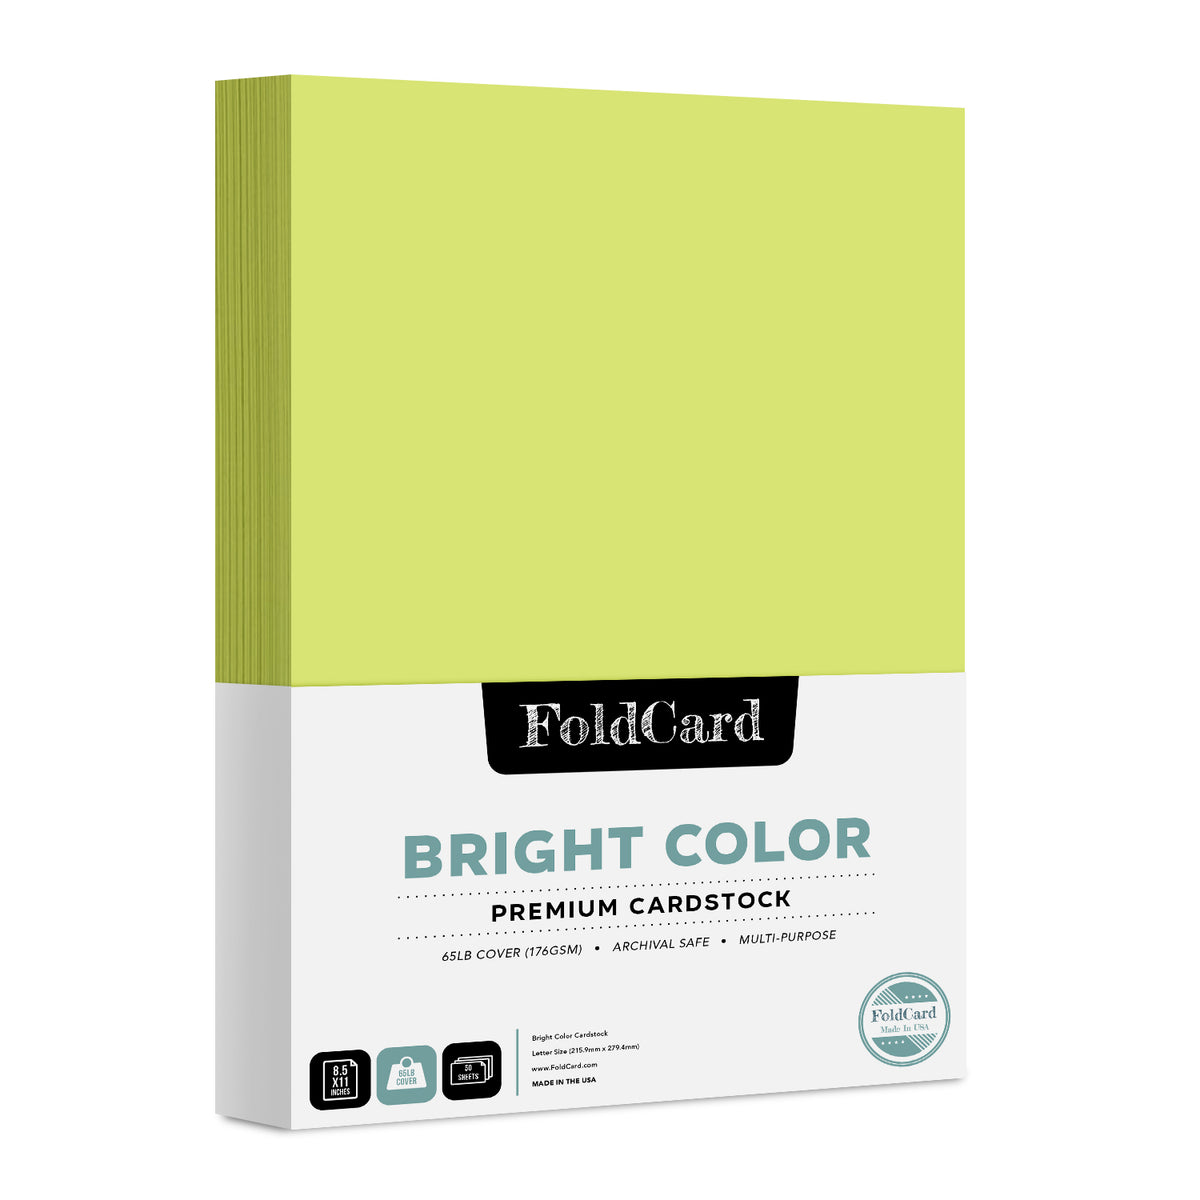 Premium Quality Bright Color Cardstock: 8.5 x 11 - 50 Sheets of 65lb Cover Weight